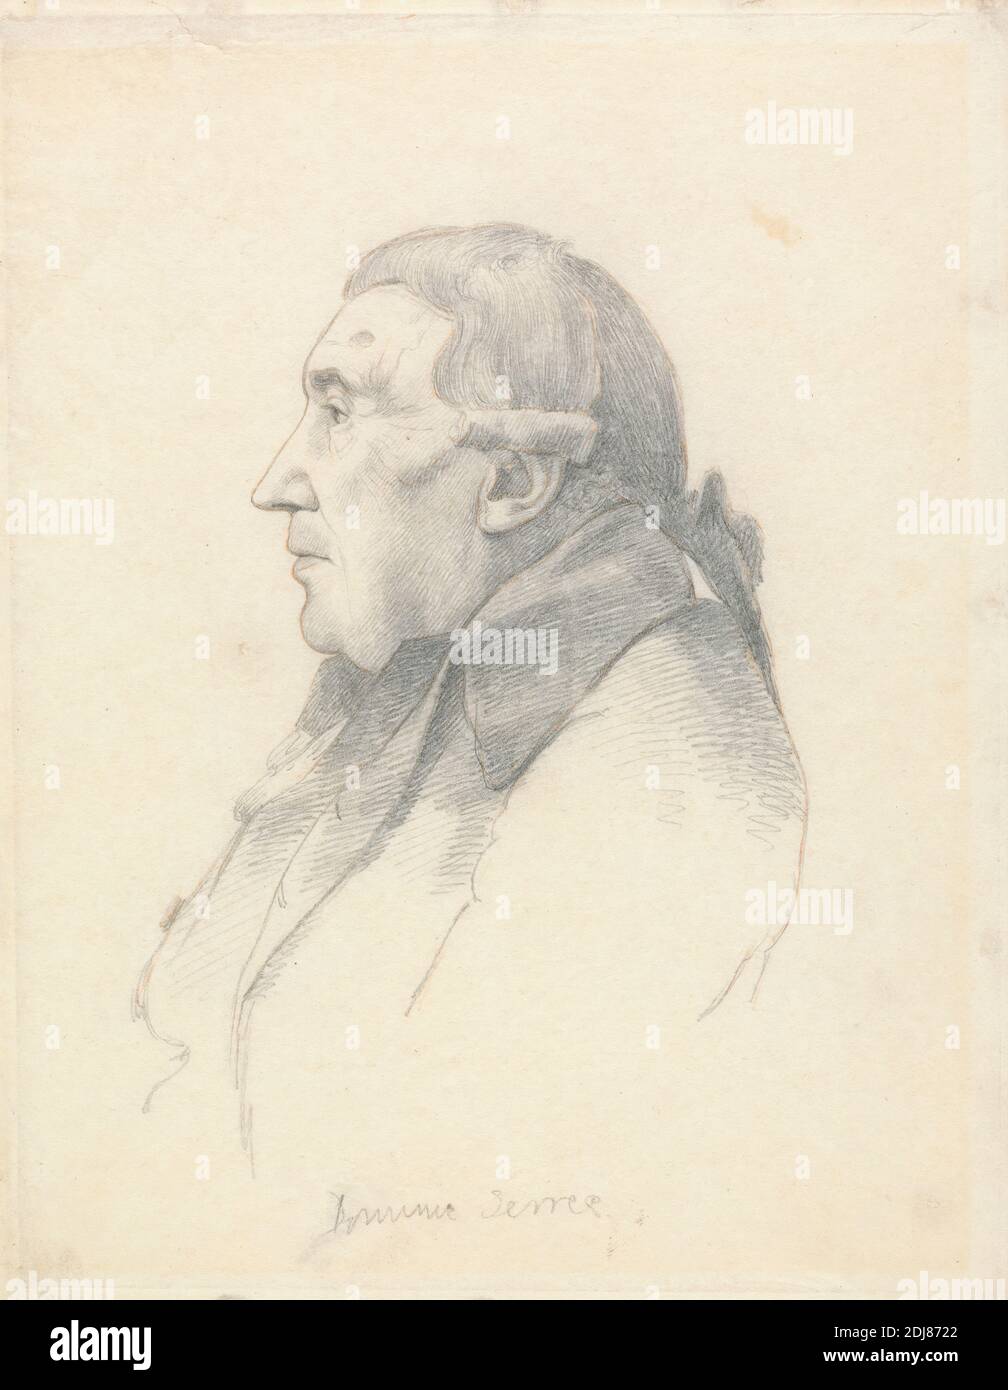 Portrait of Dominic Serres, William Daniell, 1769–1837, British, after George Dance RA, 1741–1825, British, between 1808 and 1814, Graphite with red pencil on thin, slightly textured, cream wove paper, Sheet: 9 5/8 x 7 1/2 inches (24.4 x 19.1 cm), artist, coat, collar, man, portrait, profile (figure), wig Stock Photo